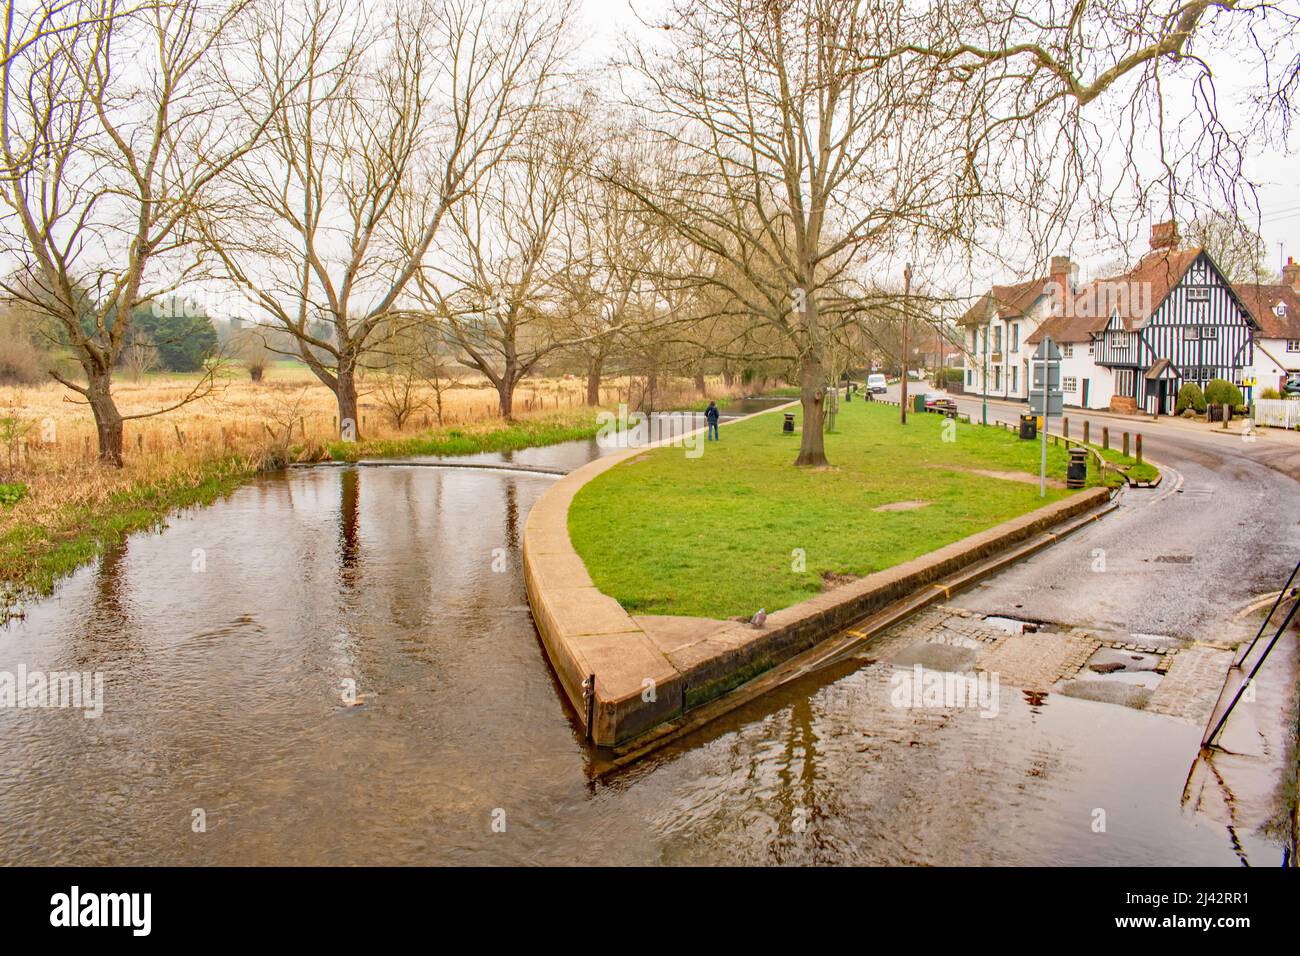 The river and ford crossing at the village of Eynesford England Stock Photo